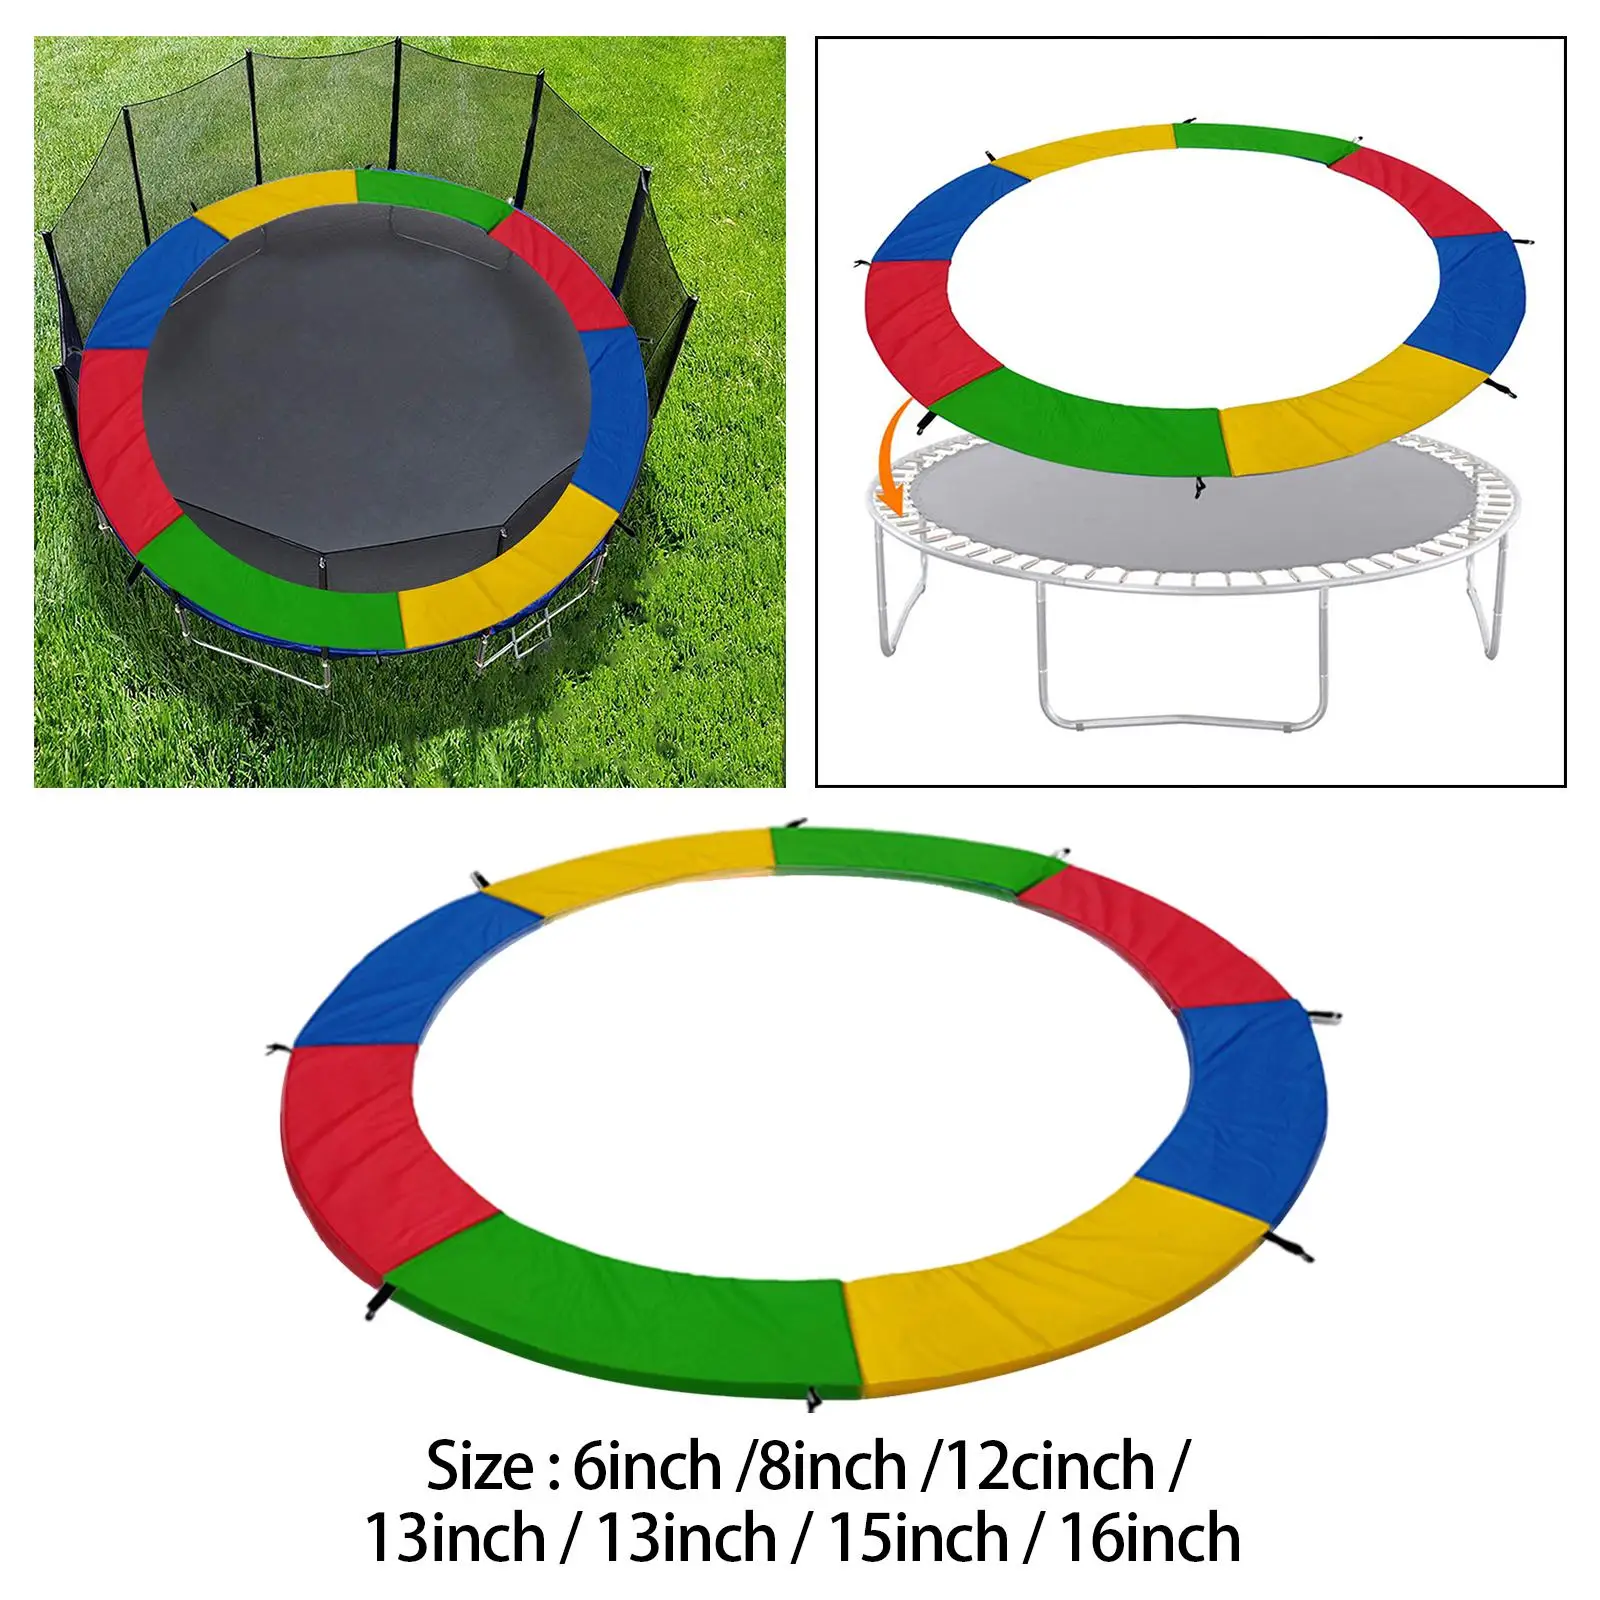 Trampoline Spring Cover Pads Shock Absorbent Durable Trampoline Edge Cover Easy to Install Waterproof Tear Resistant Side Guard